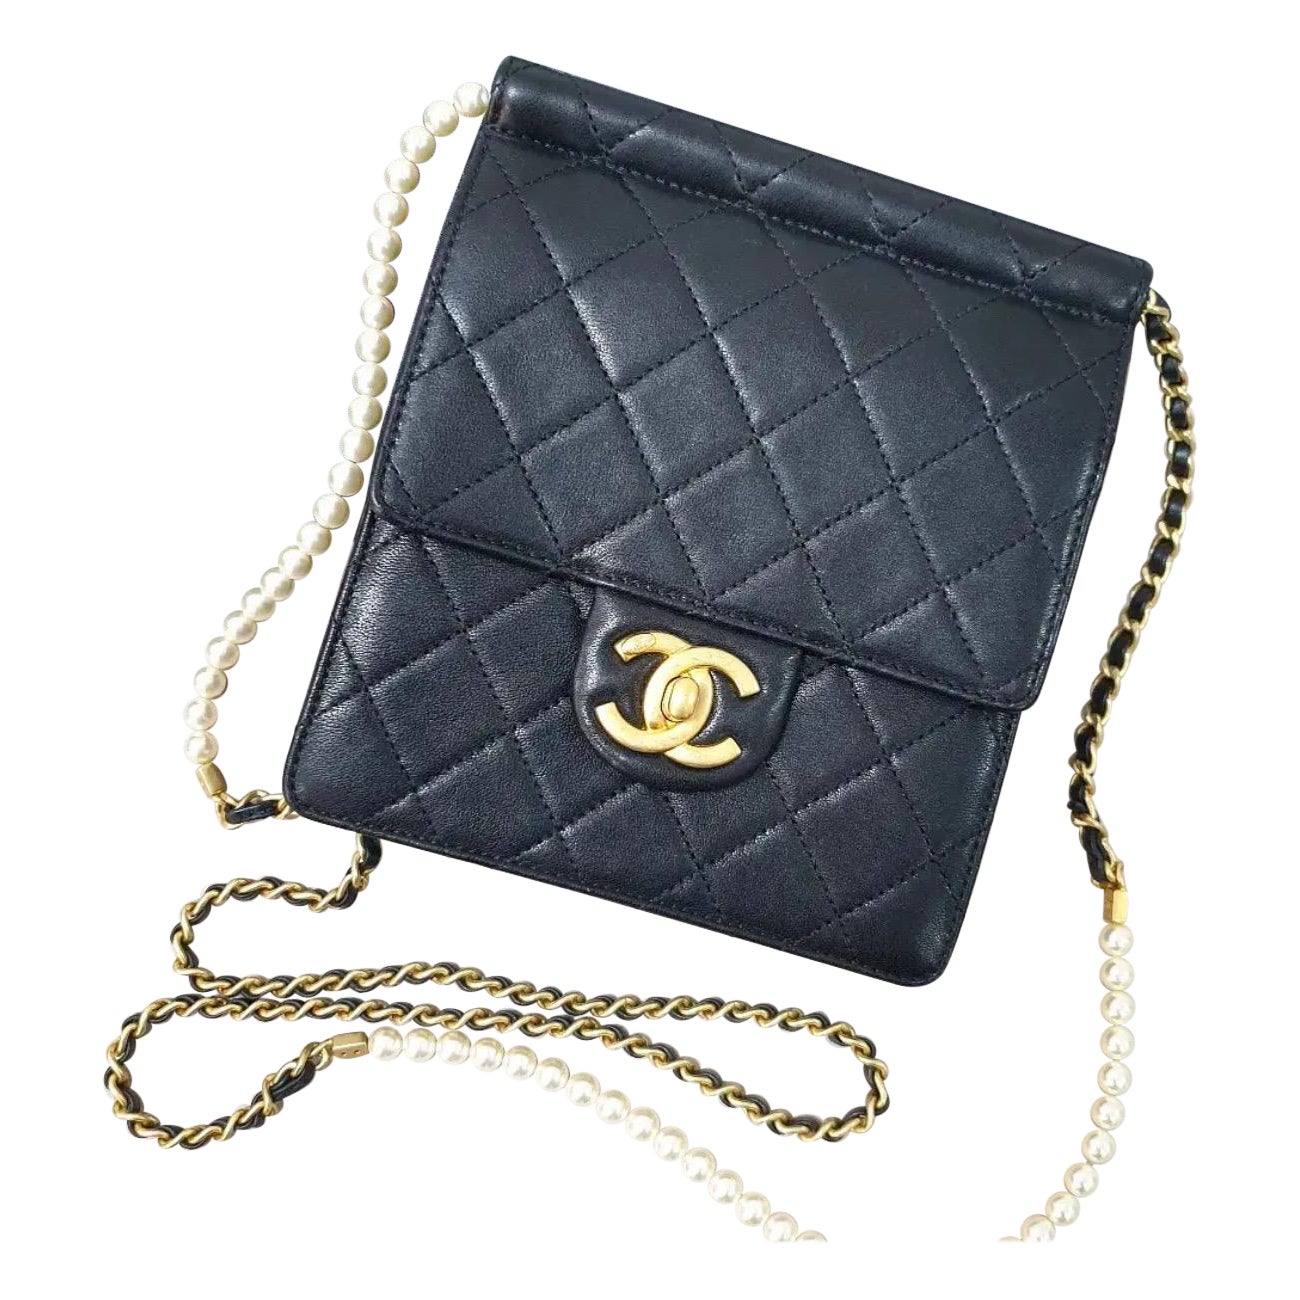 Chanel Black Small Chic Pearls Flap Bag For Sale